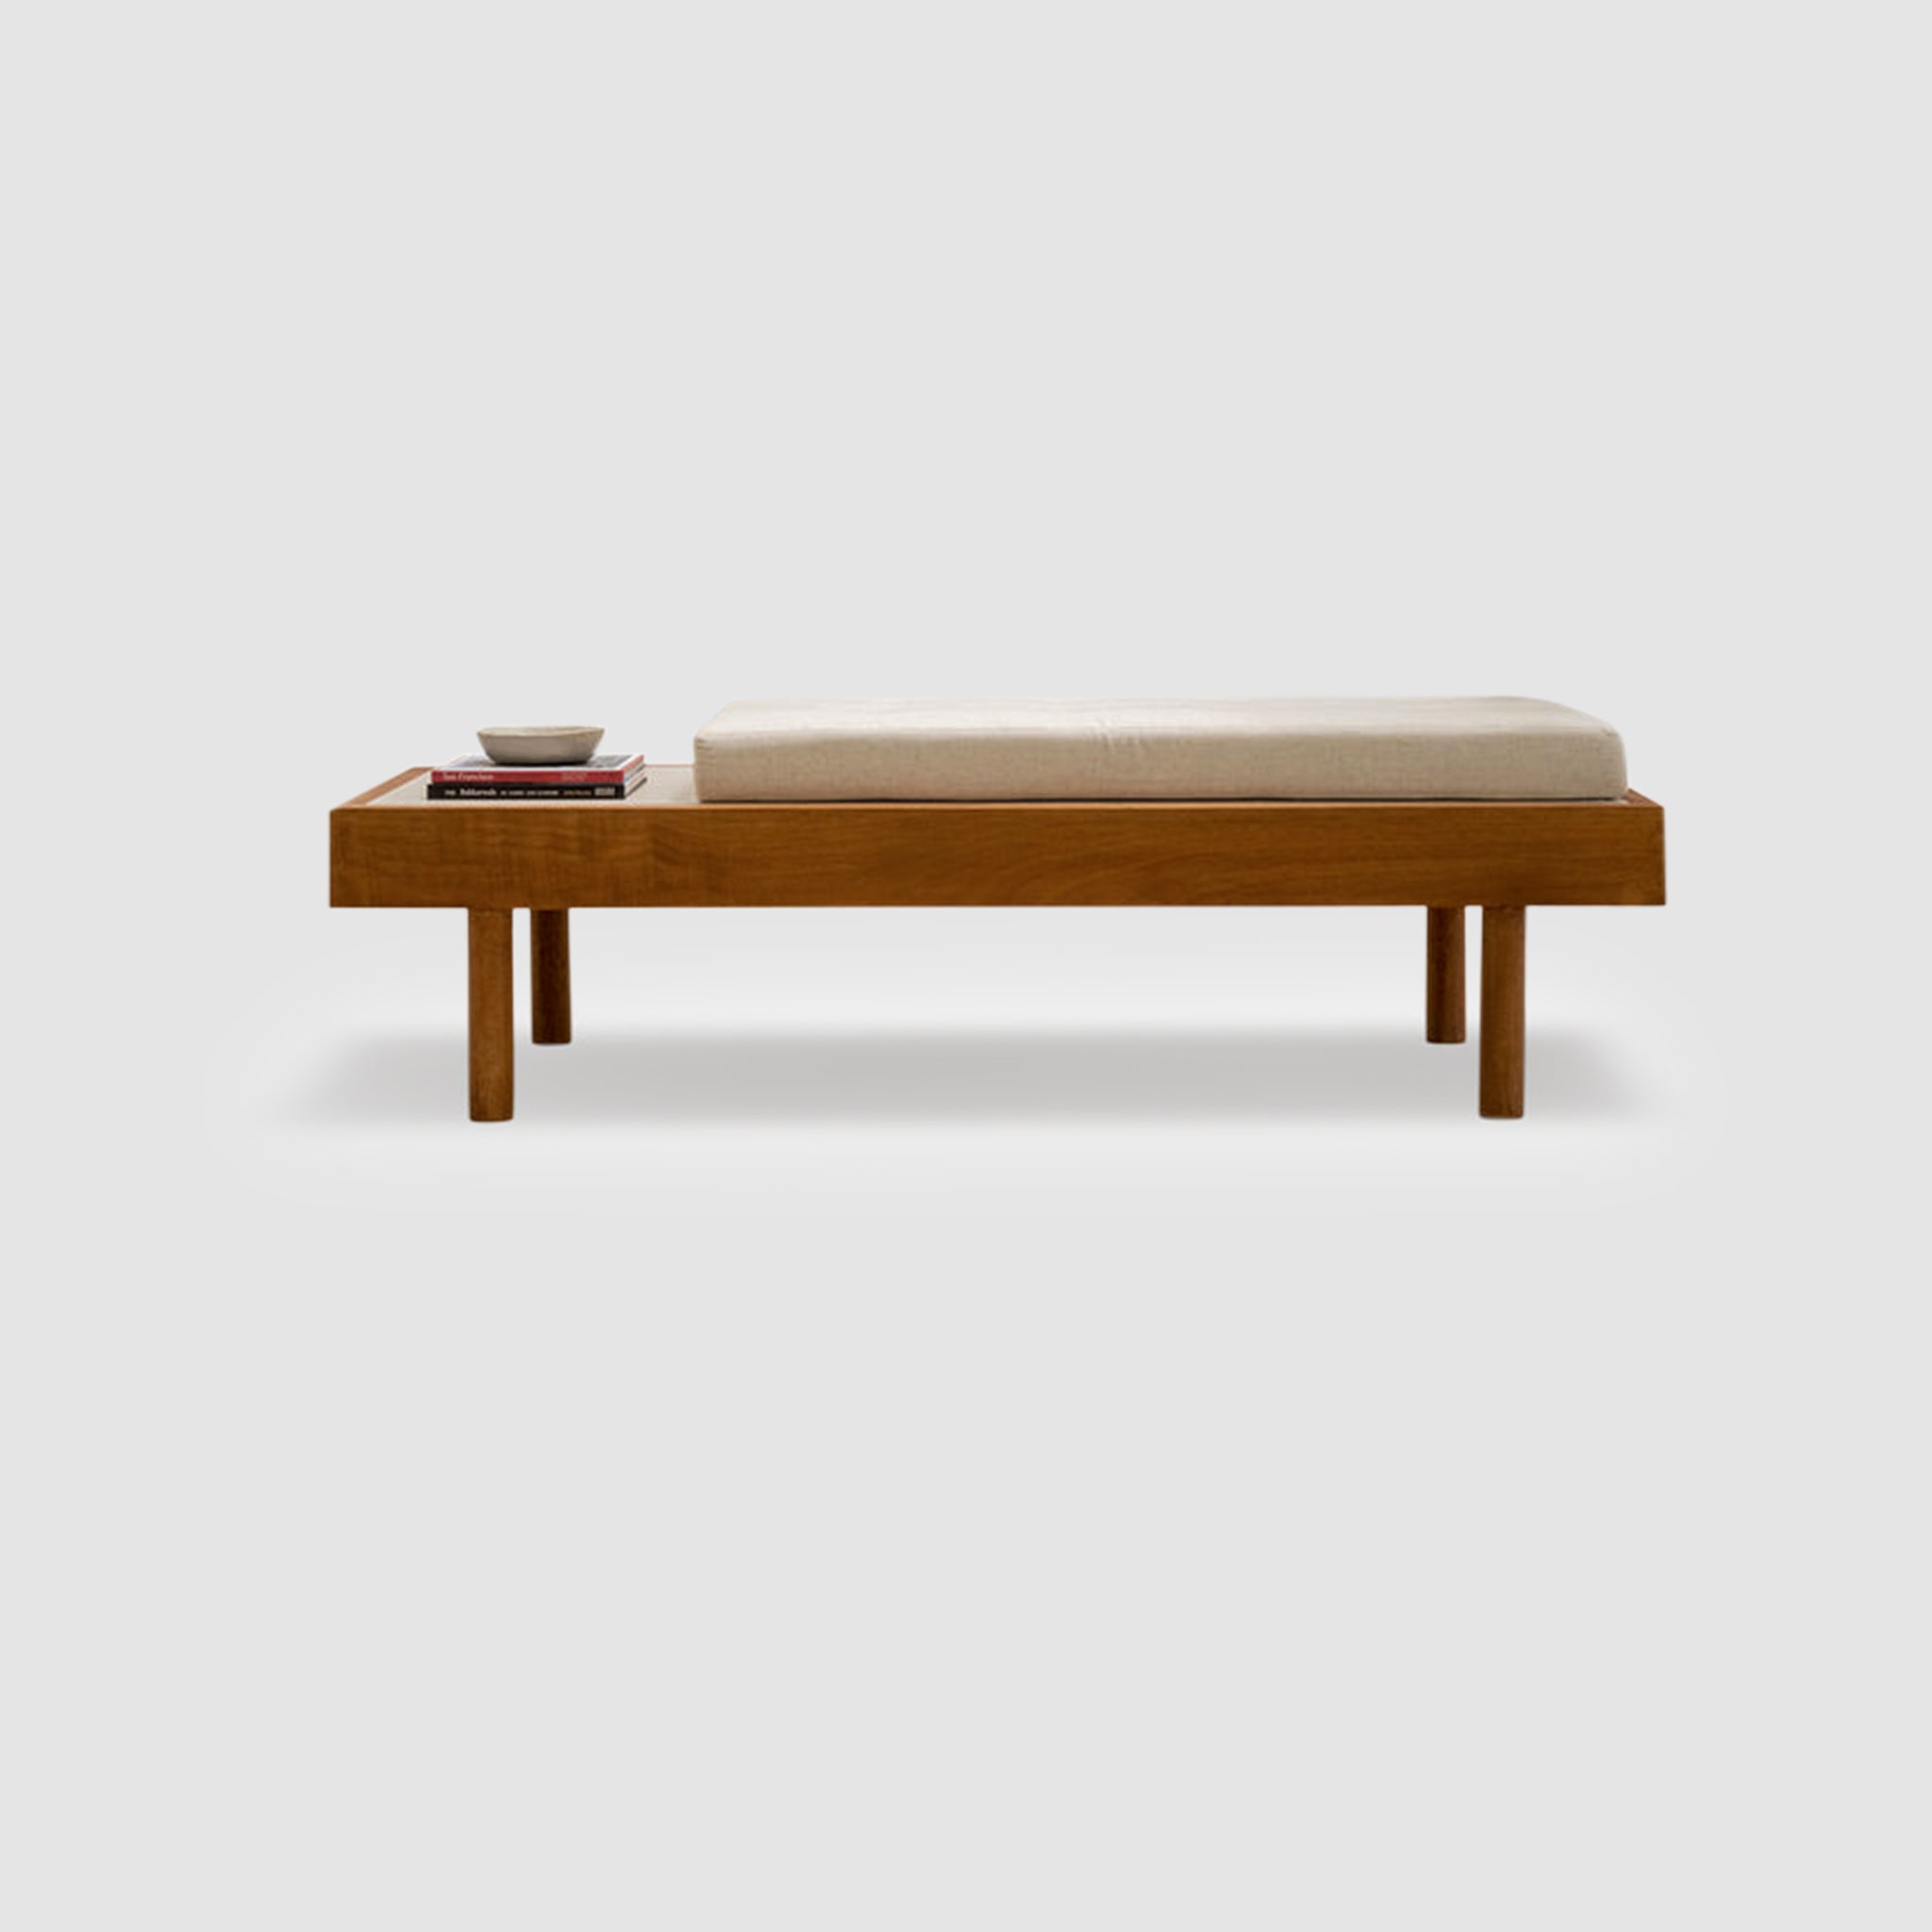 Modern wooden daybed with a customizable cushion and a side tray, placed on a white background